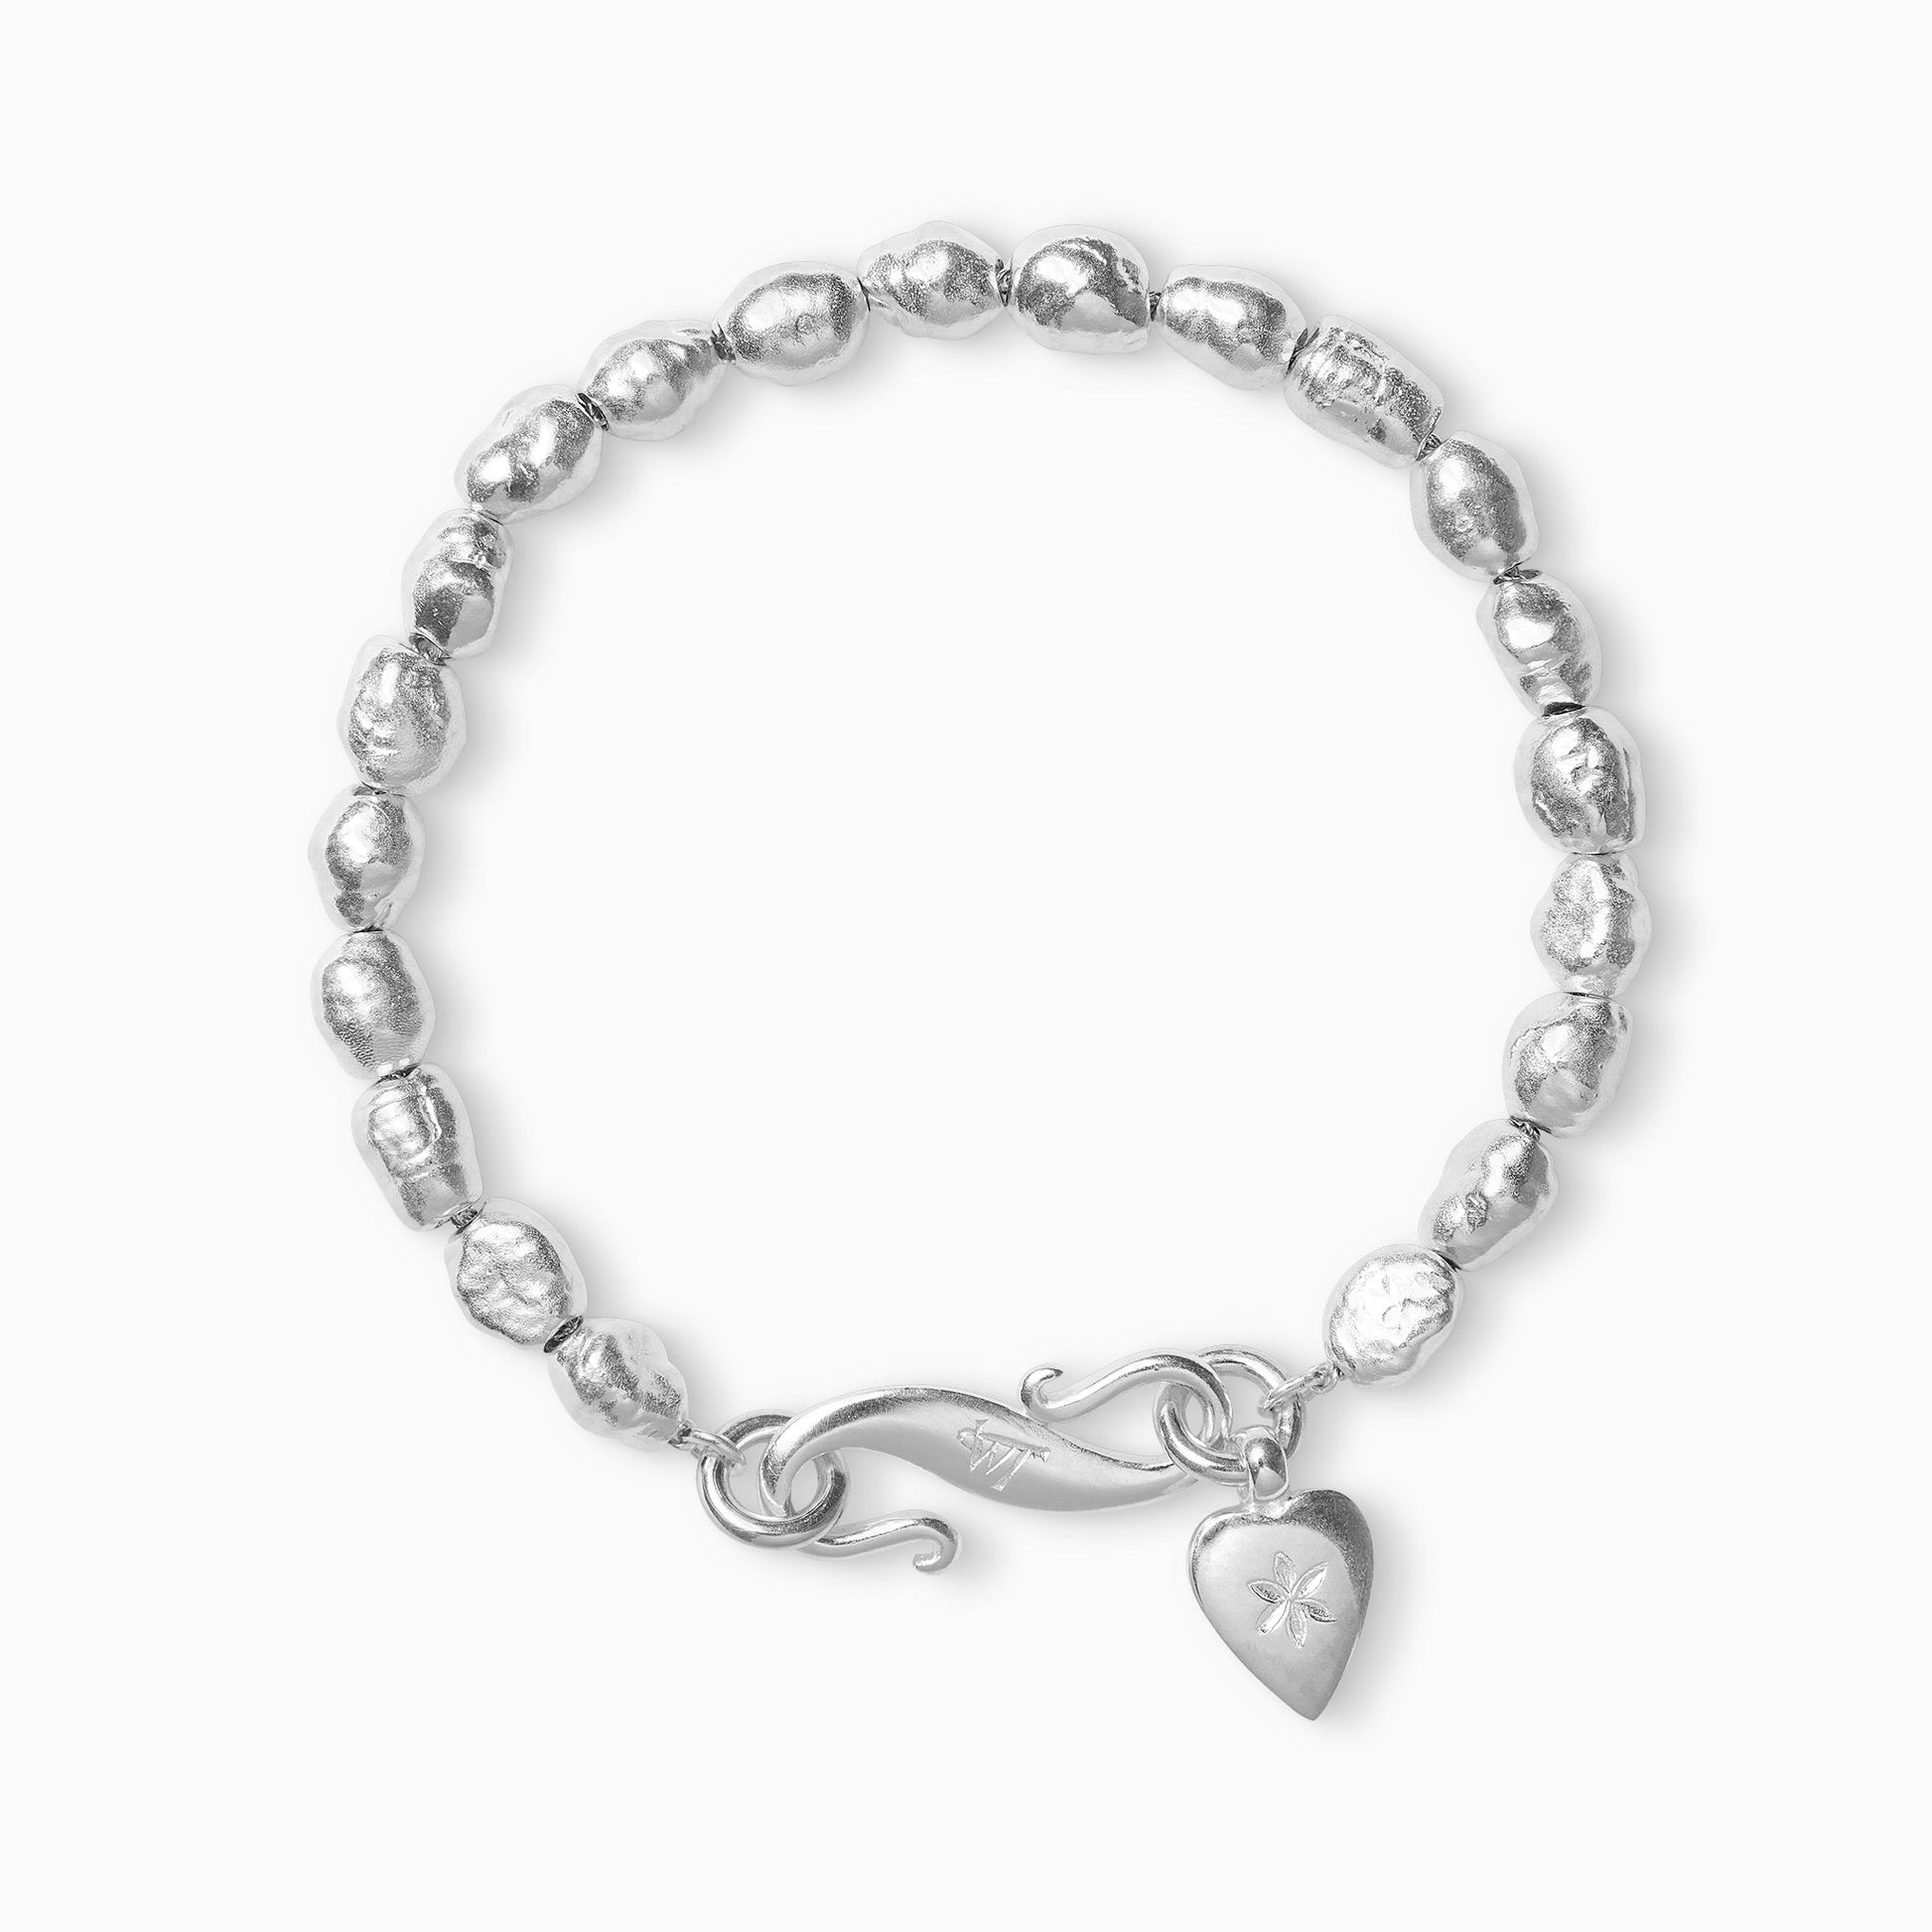 A recycled Silver bracelet of handmade irregular pearl shaped textured beads with a smooth heart shaped charm engraved with a 6 petal flower and our signature ’S’ clasp.  Bracelet length 190mm.. Beads varying approximately 8mm x 6mm.